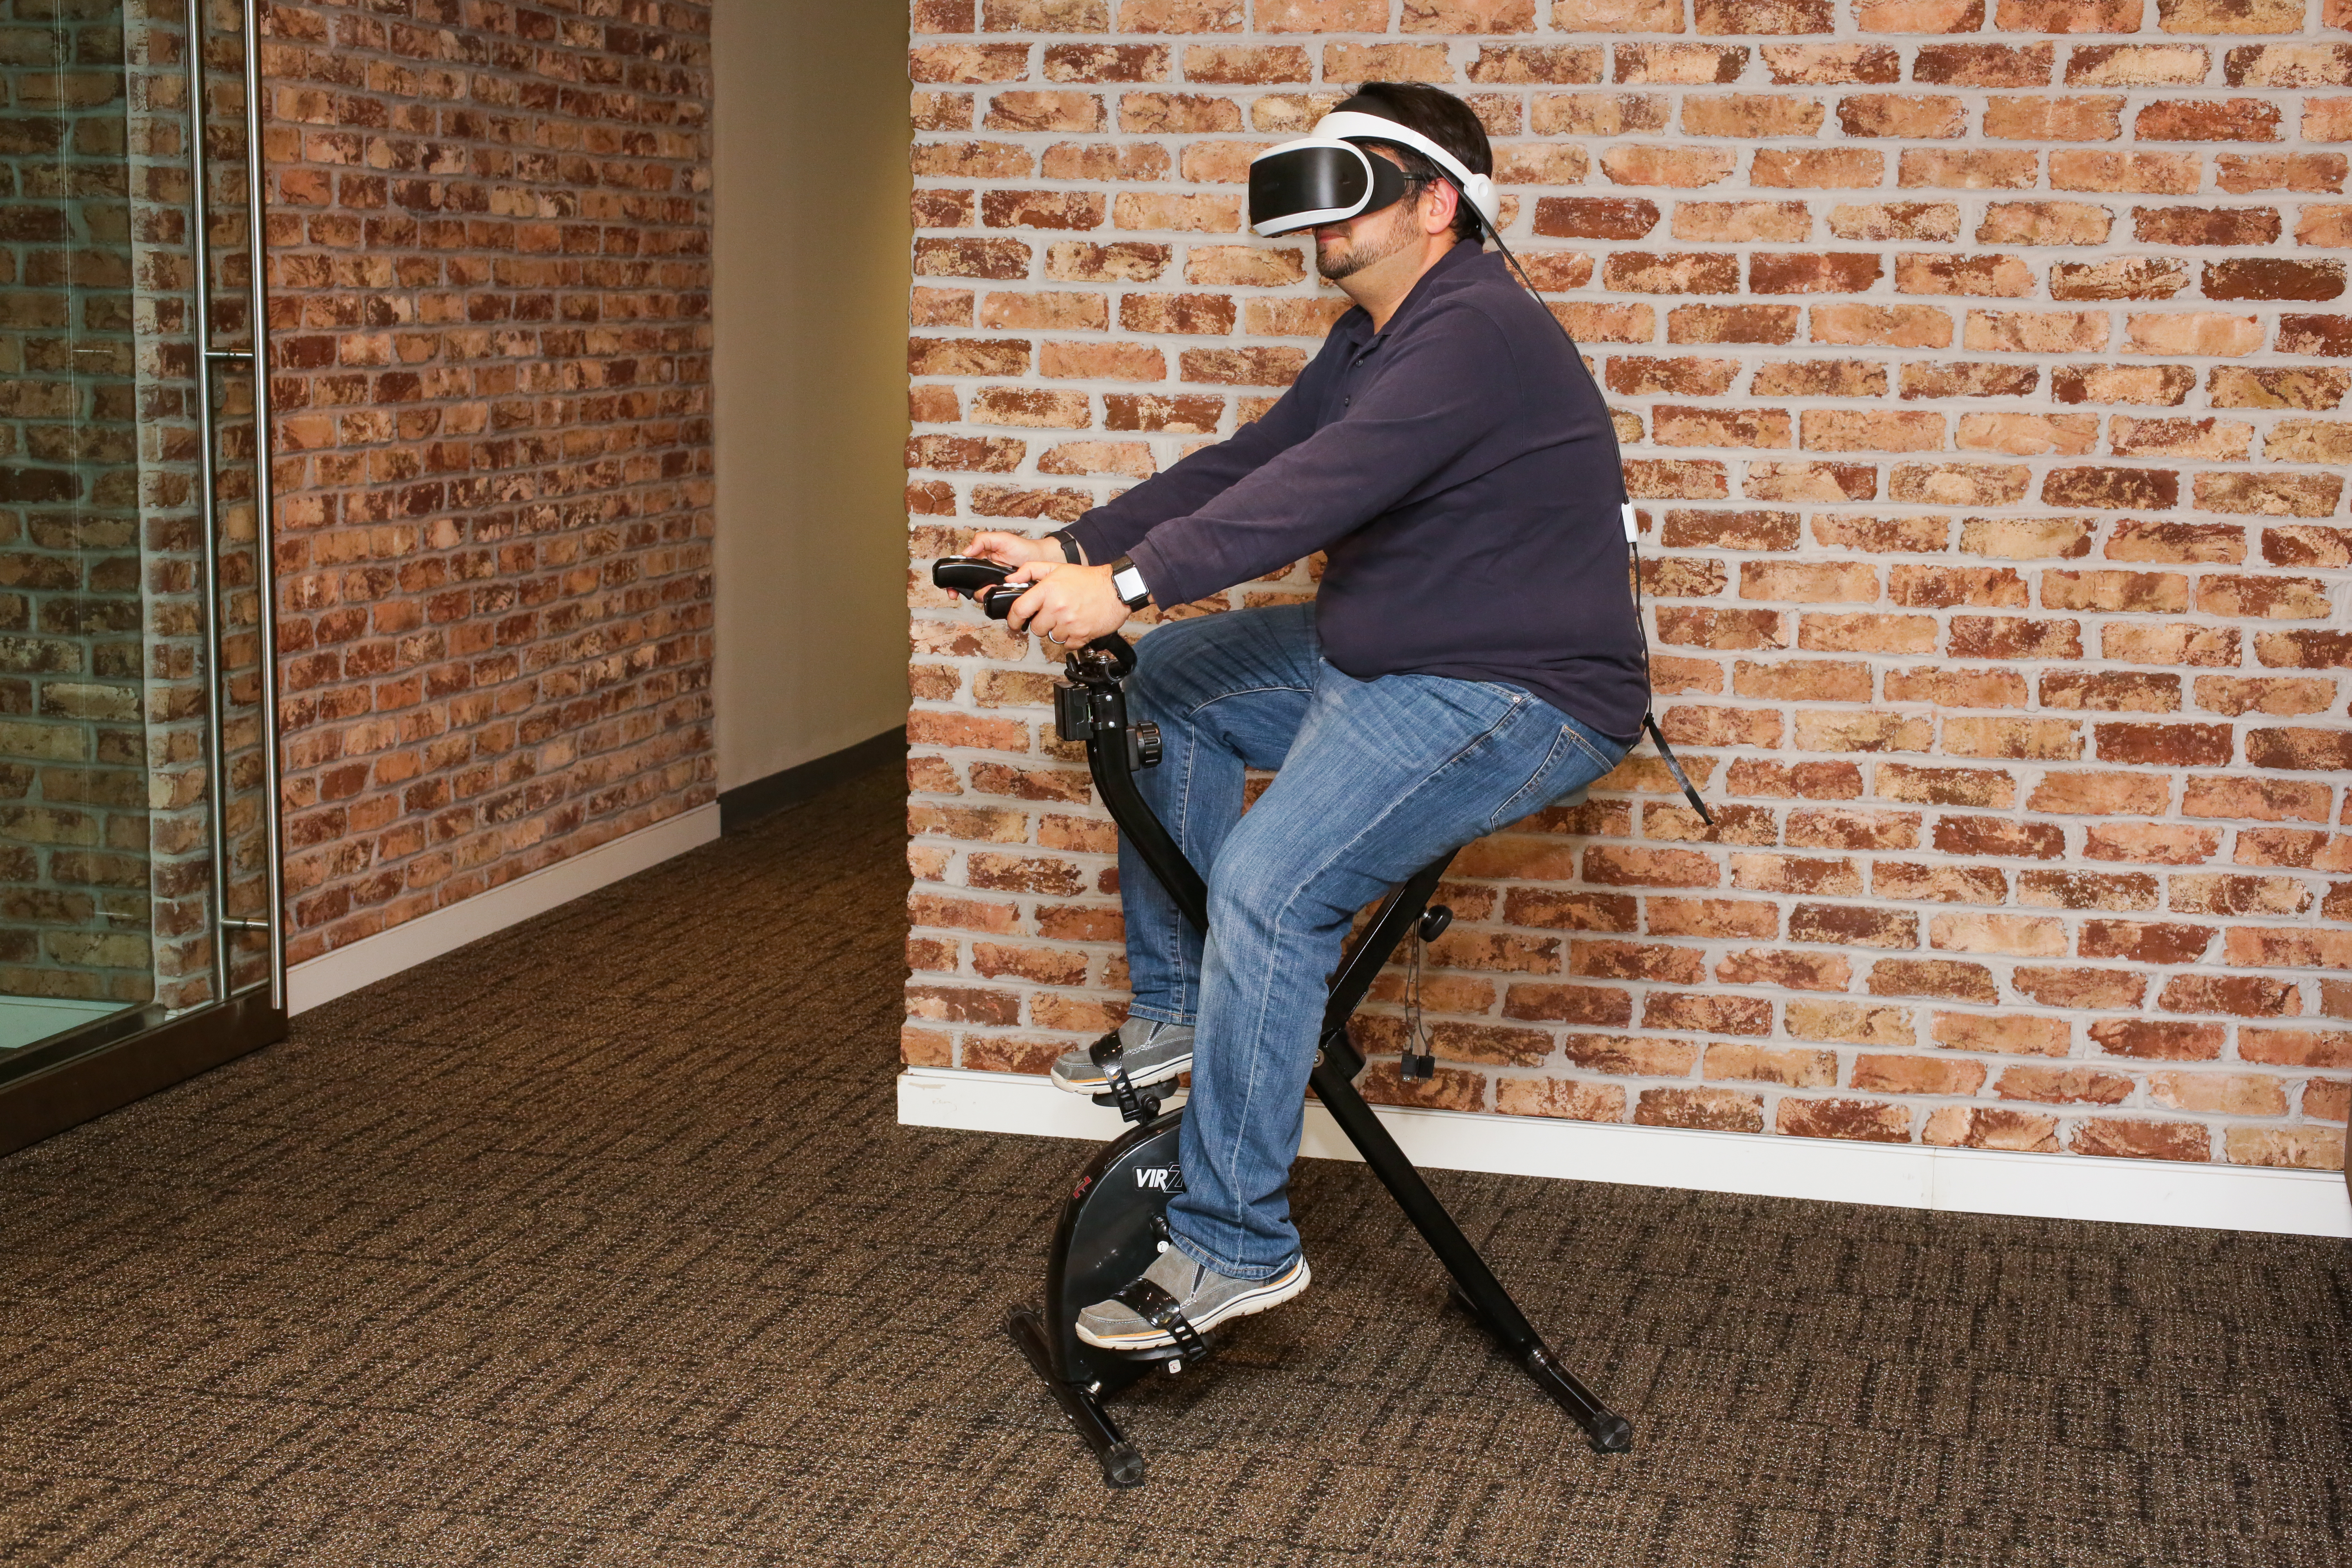 Vr riding. VR Bike. VR Bicycle. VR фитнес. Ride out.